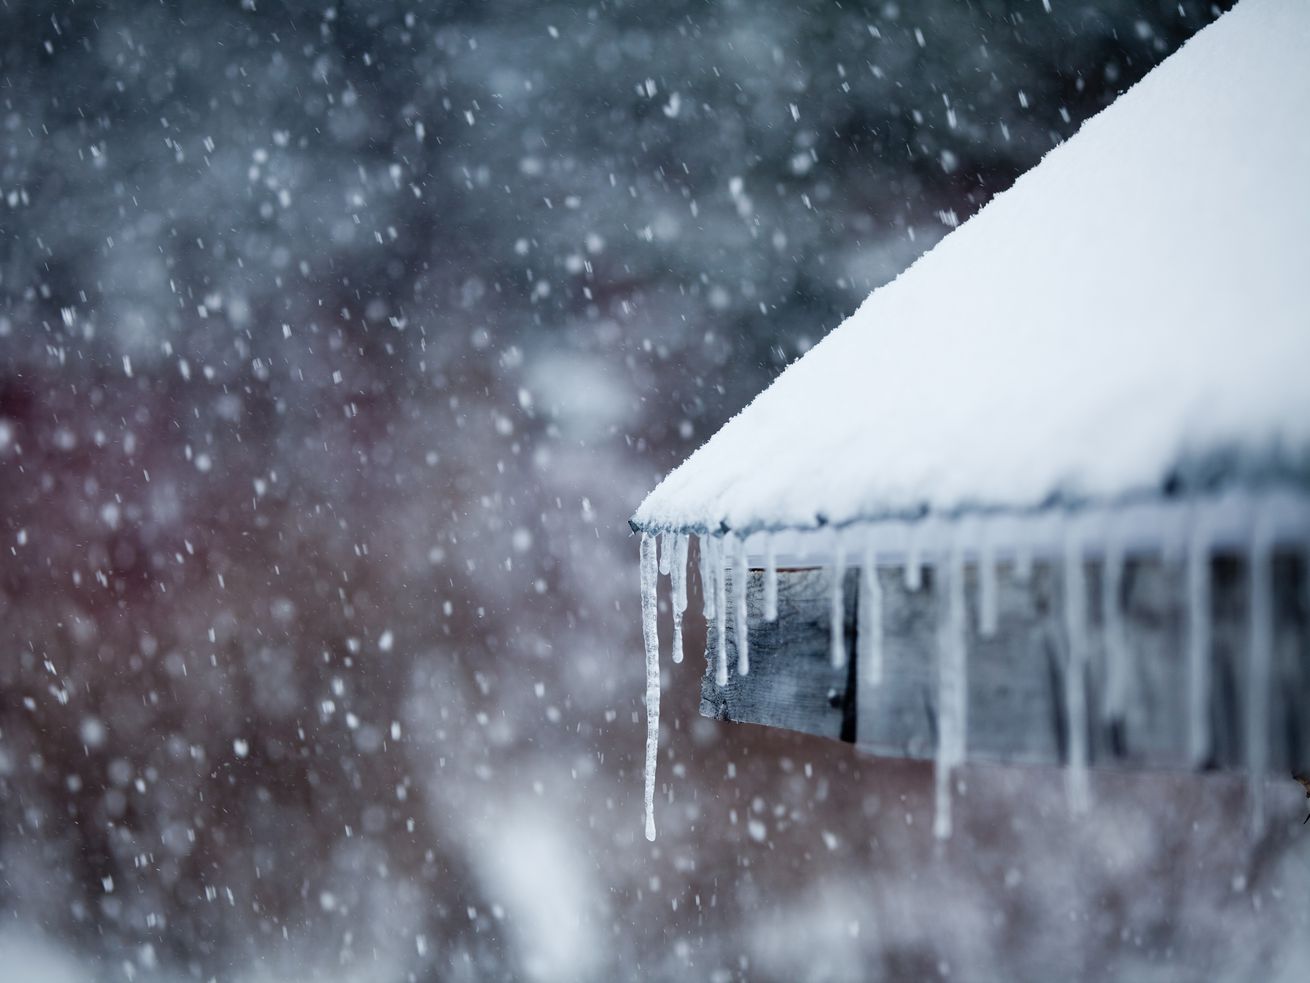 A roof covered in snow and ice during a snow storm